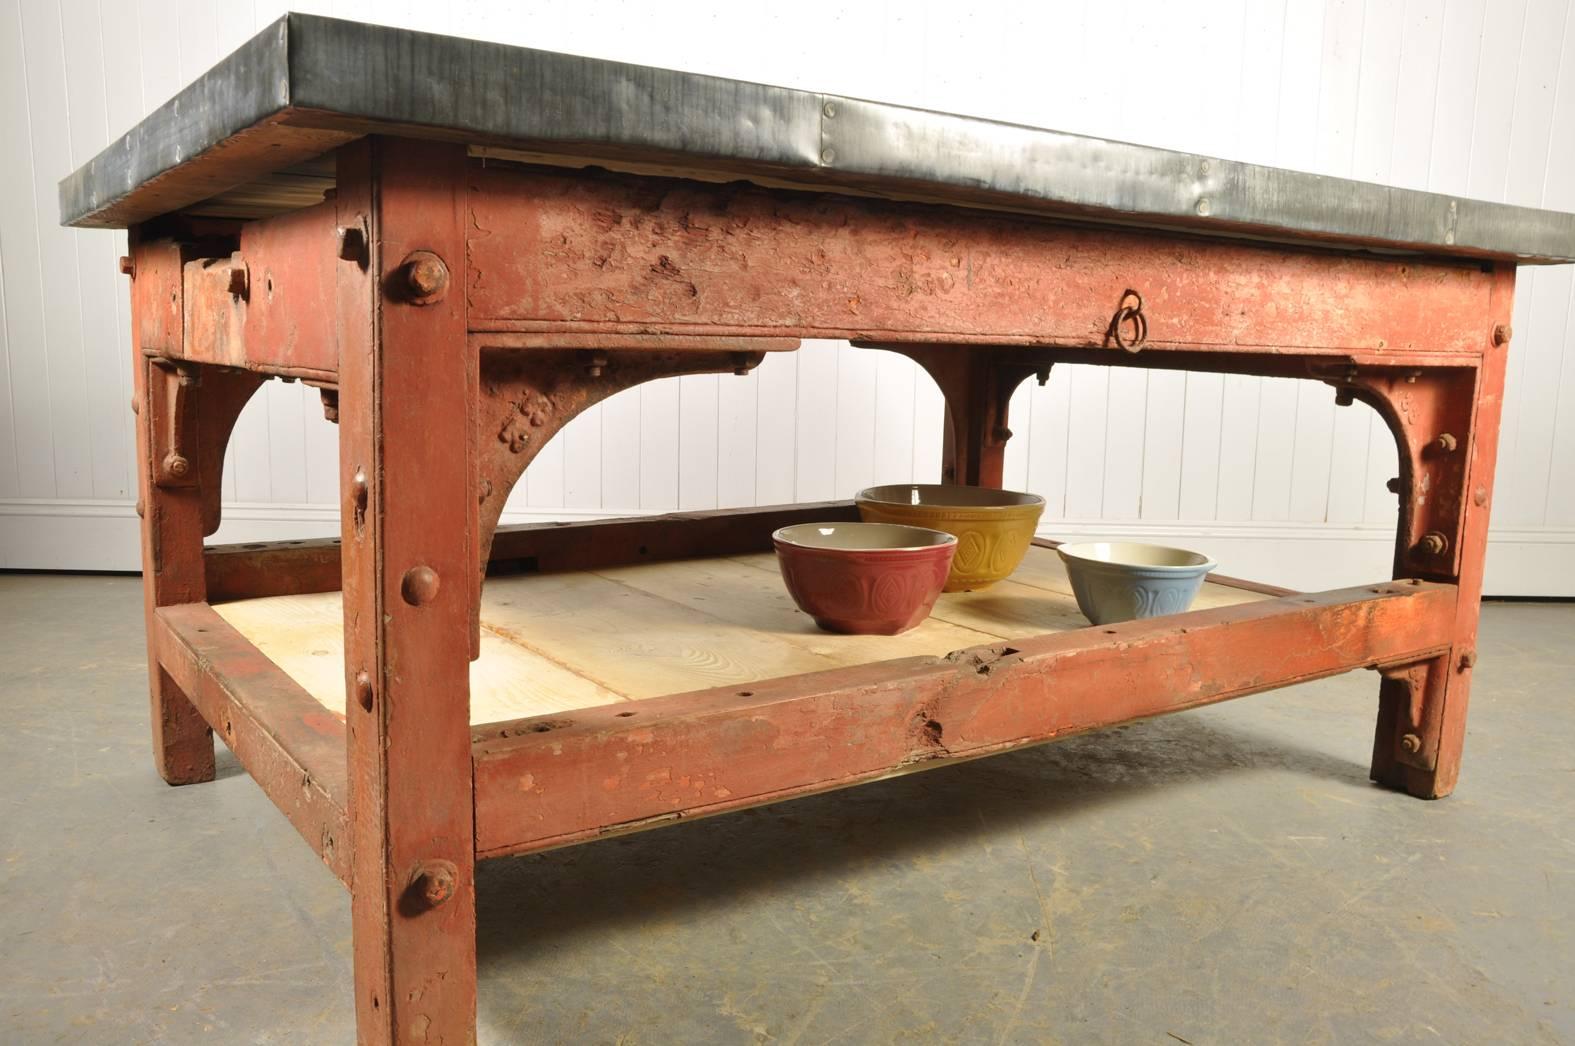 Industrial 'Saw Mill' Red Table Base with New Zinc Top, circa 1910 In Good Condition For Sale In Cirencester, Gloucestershire